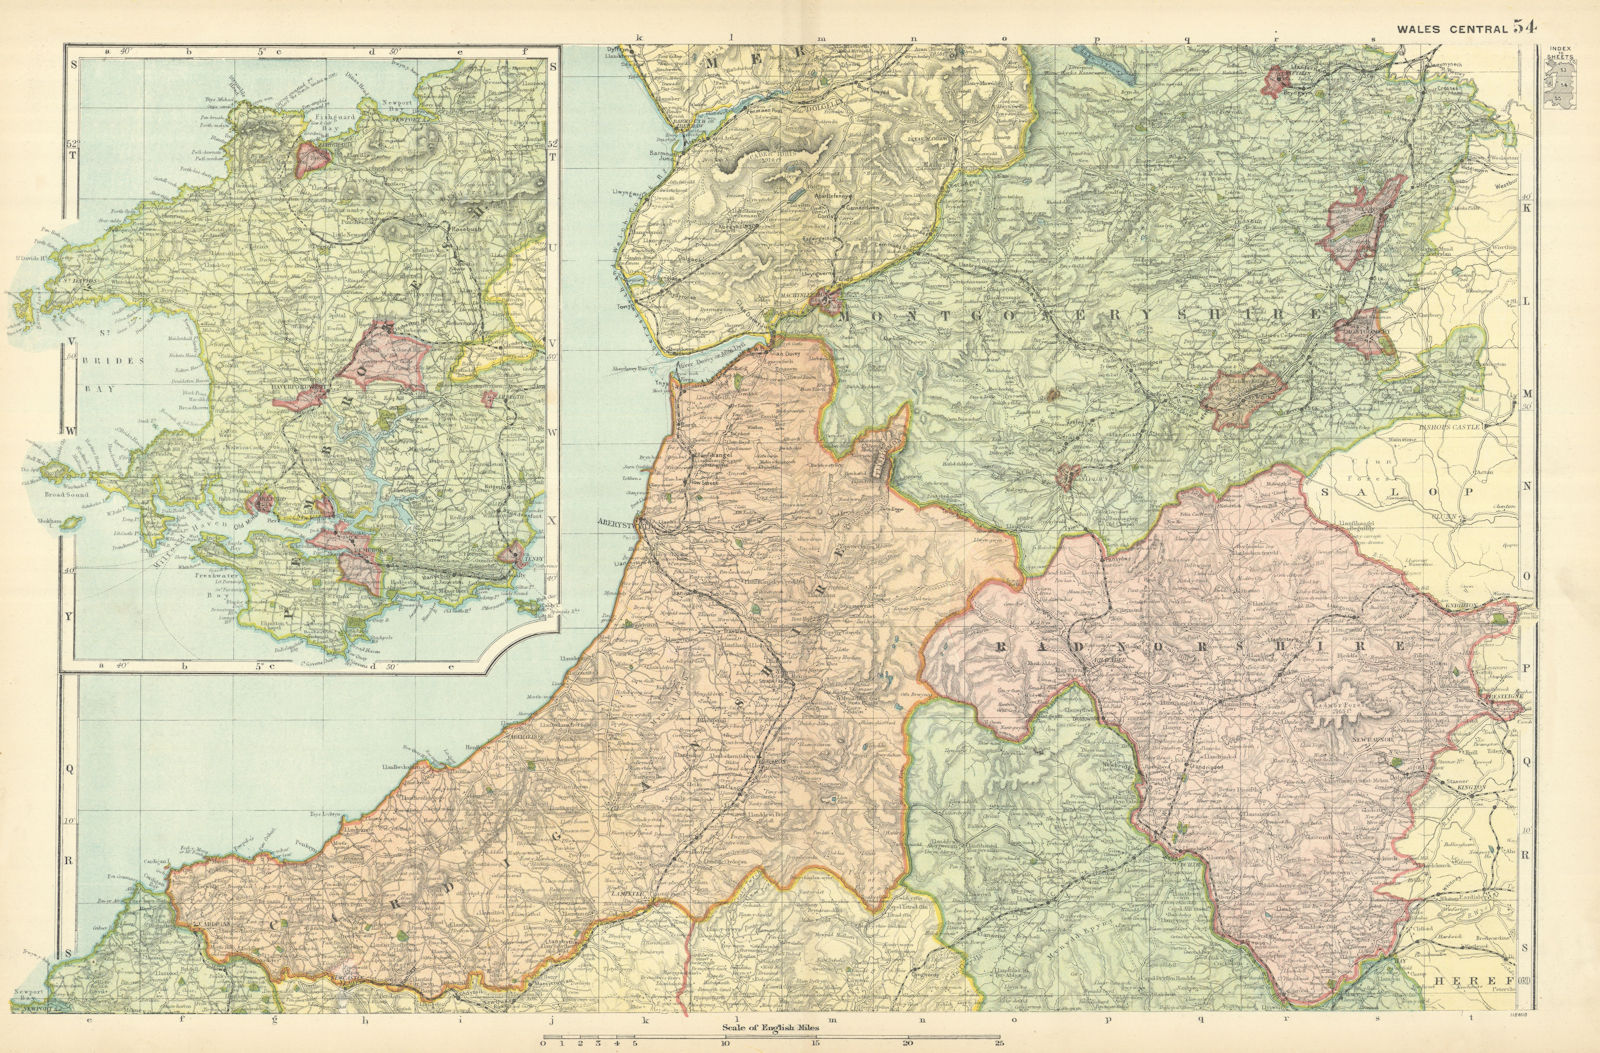 Associate Product CENTRAL WALES & PEMBROKESHIRE. Showing Parliamentary divisions. BACON 1898 map